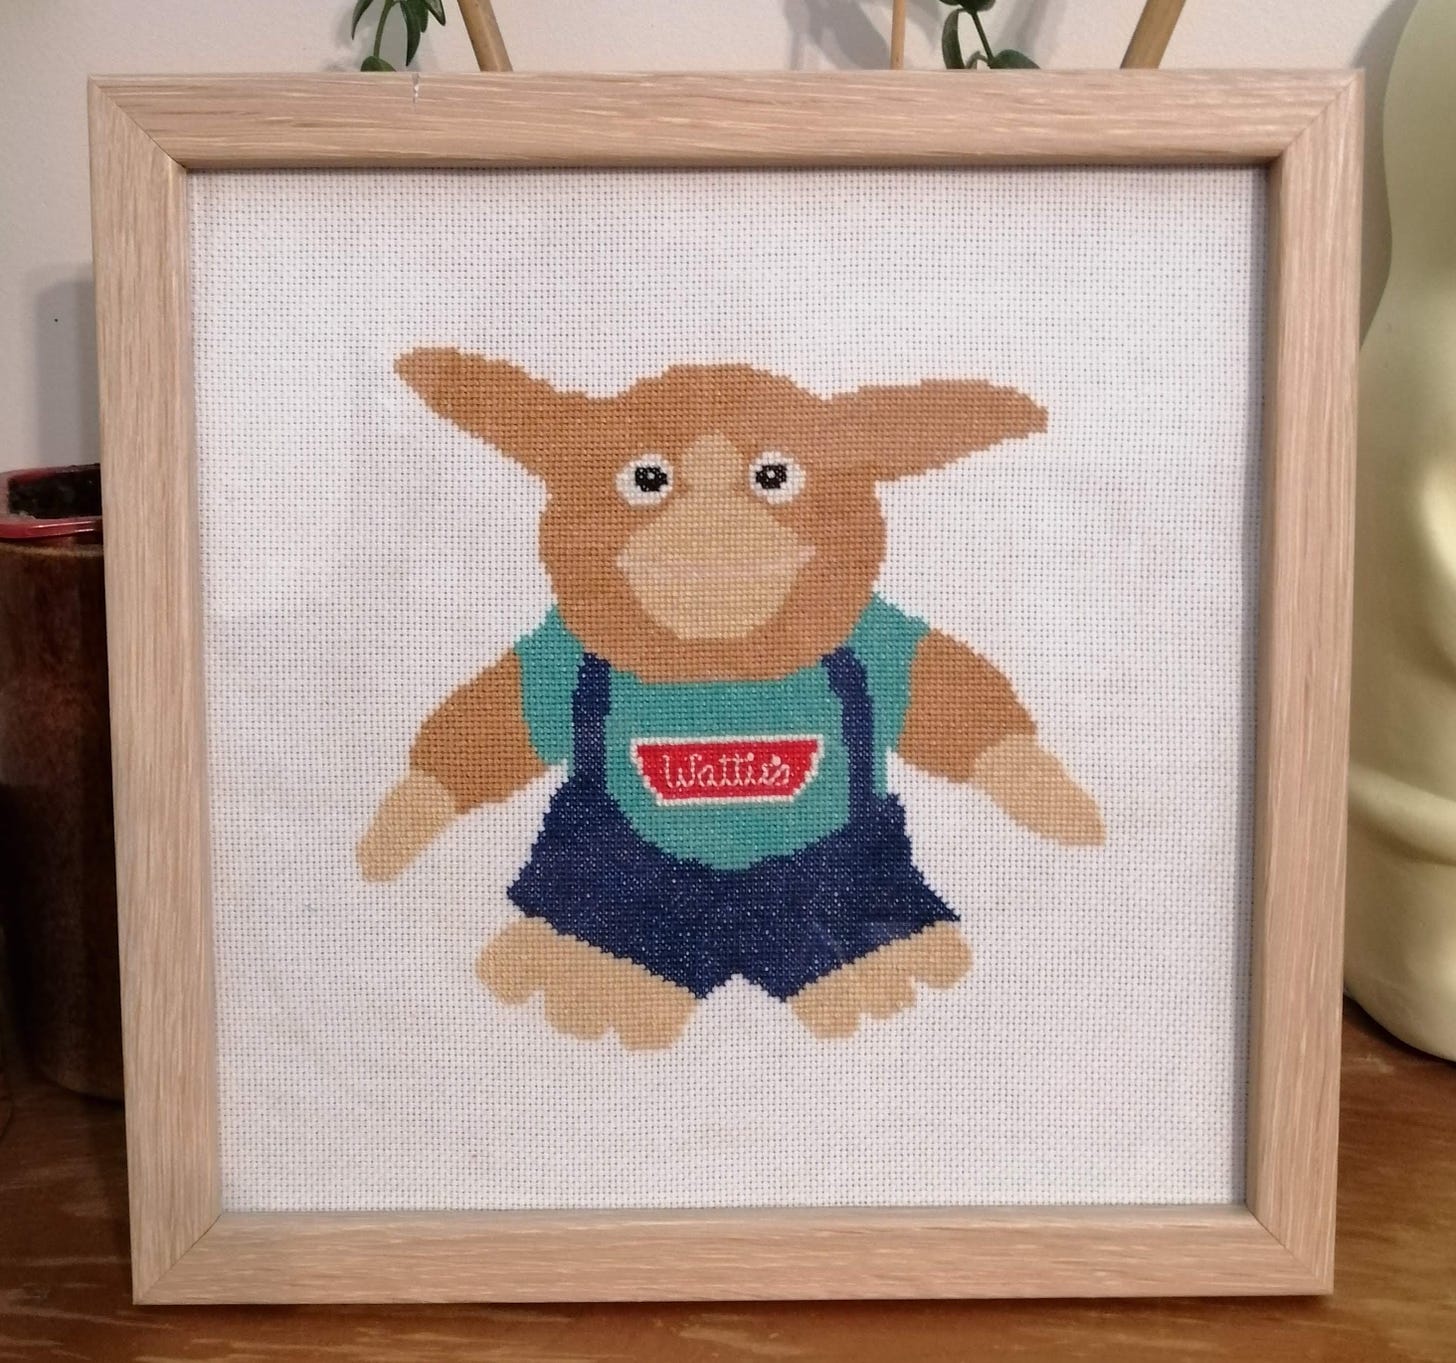 Cross stitch of Getty the Wattie's spaghetti yeti from the 90s. He looks a bit cuter than the puppet from the TV ads as a cross stitch